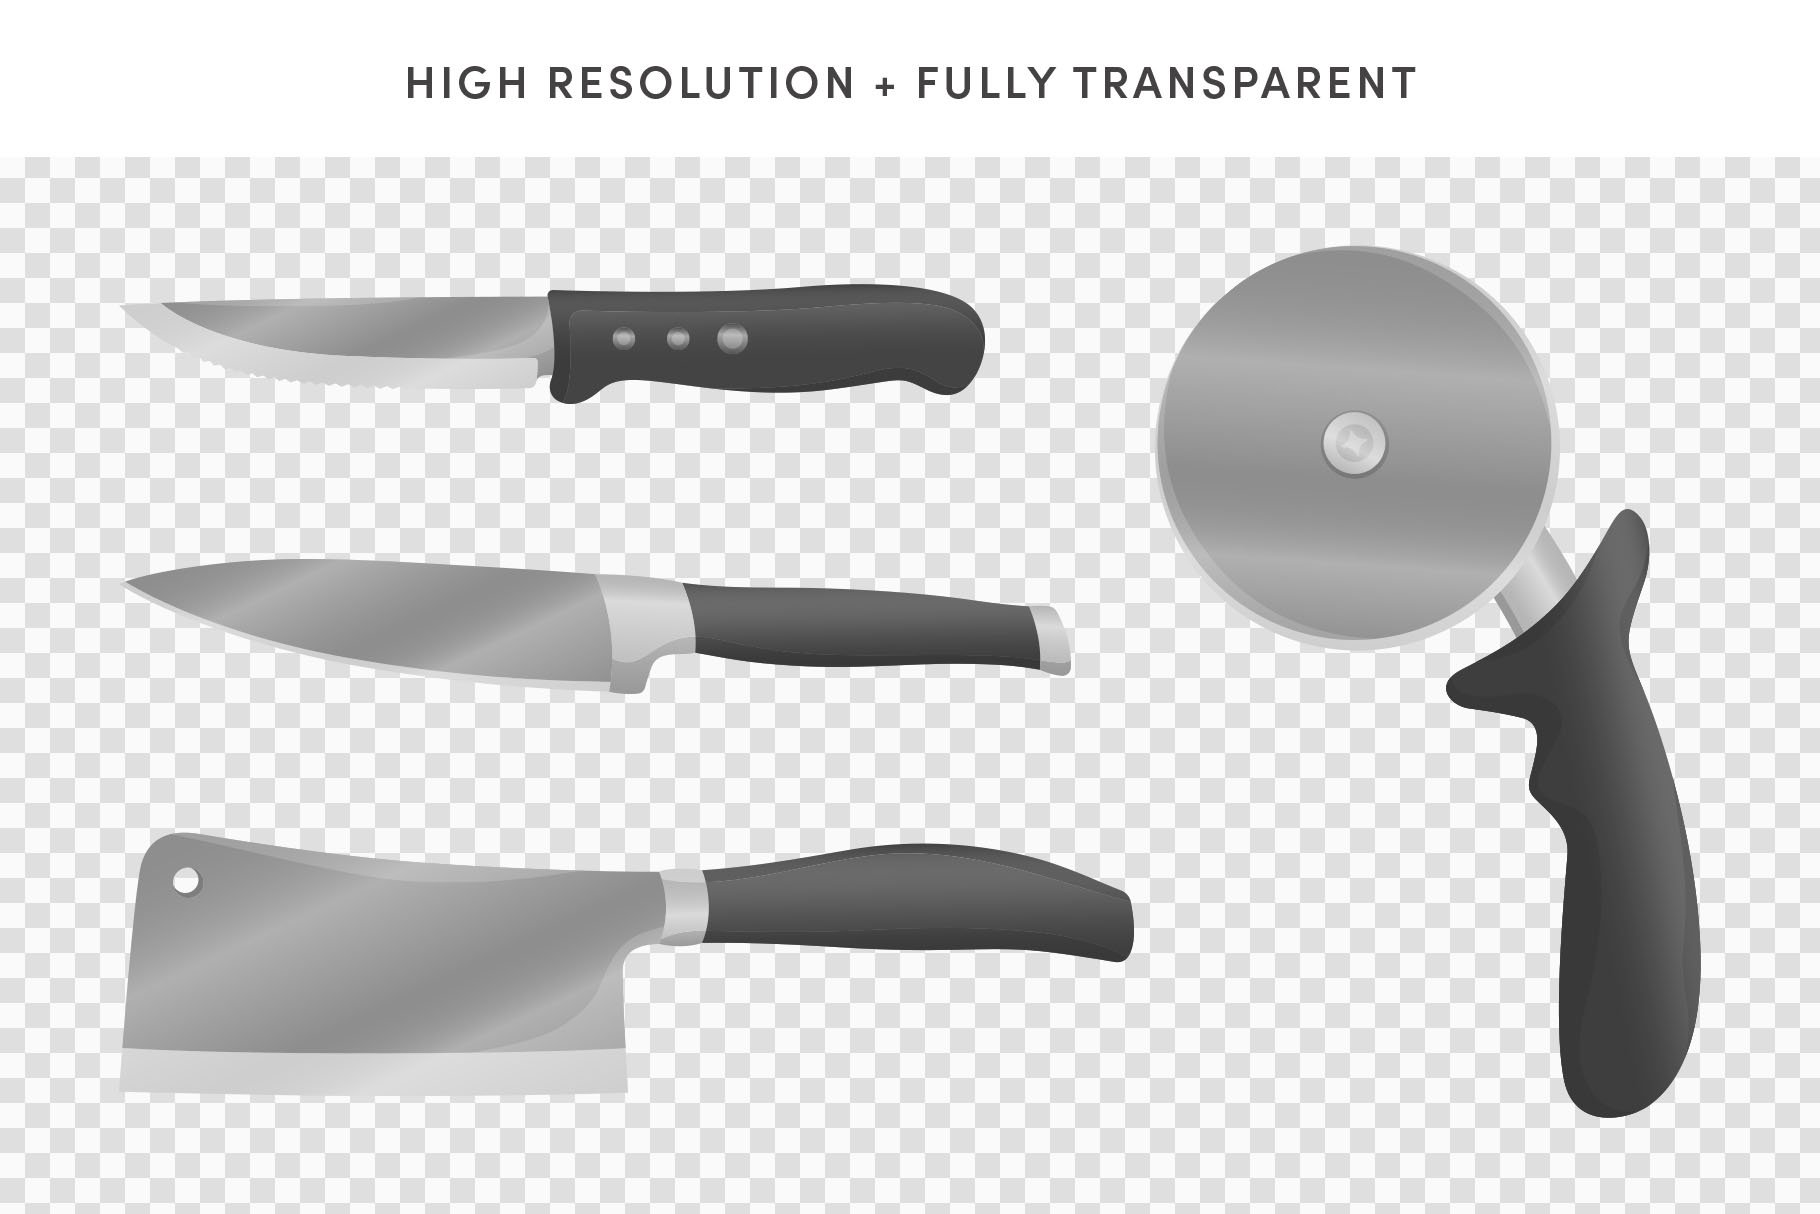 Knife Illustrations preview image.